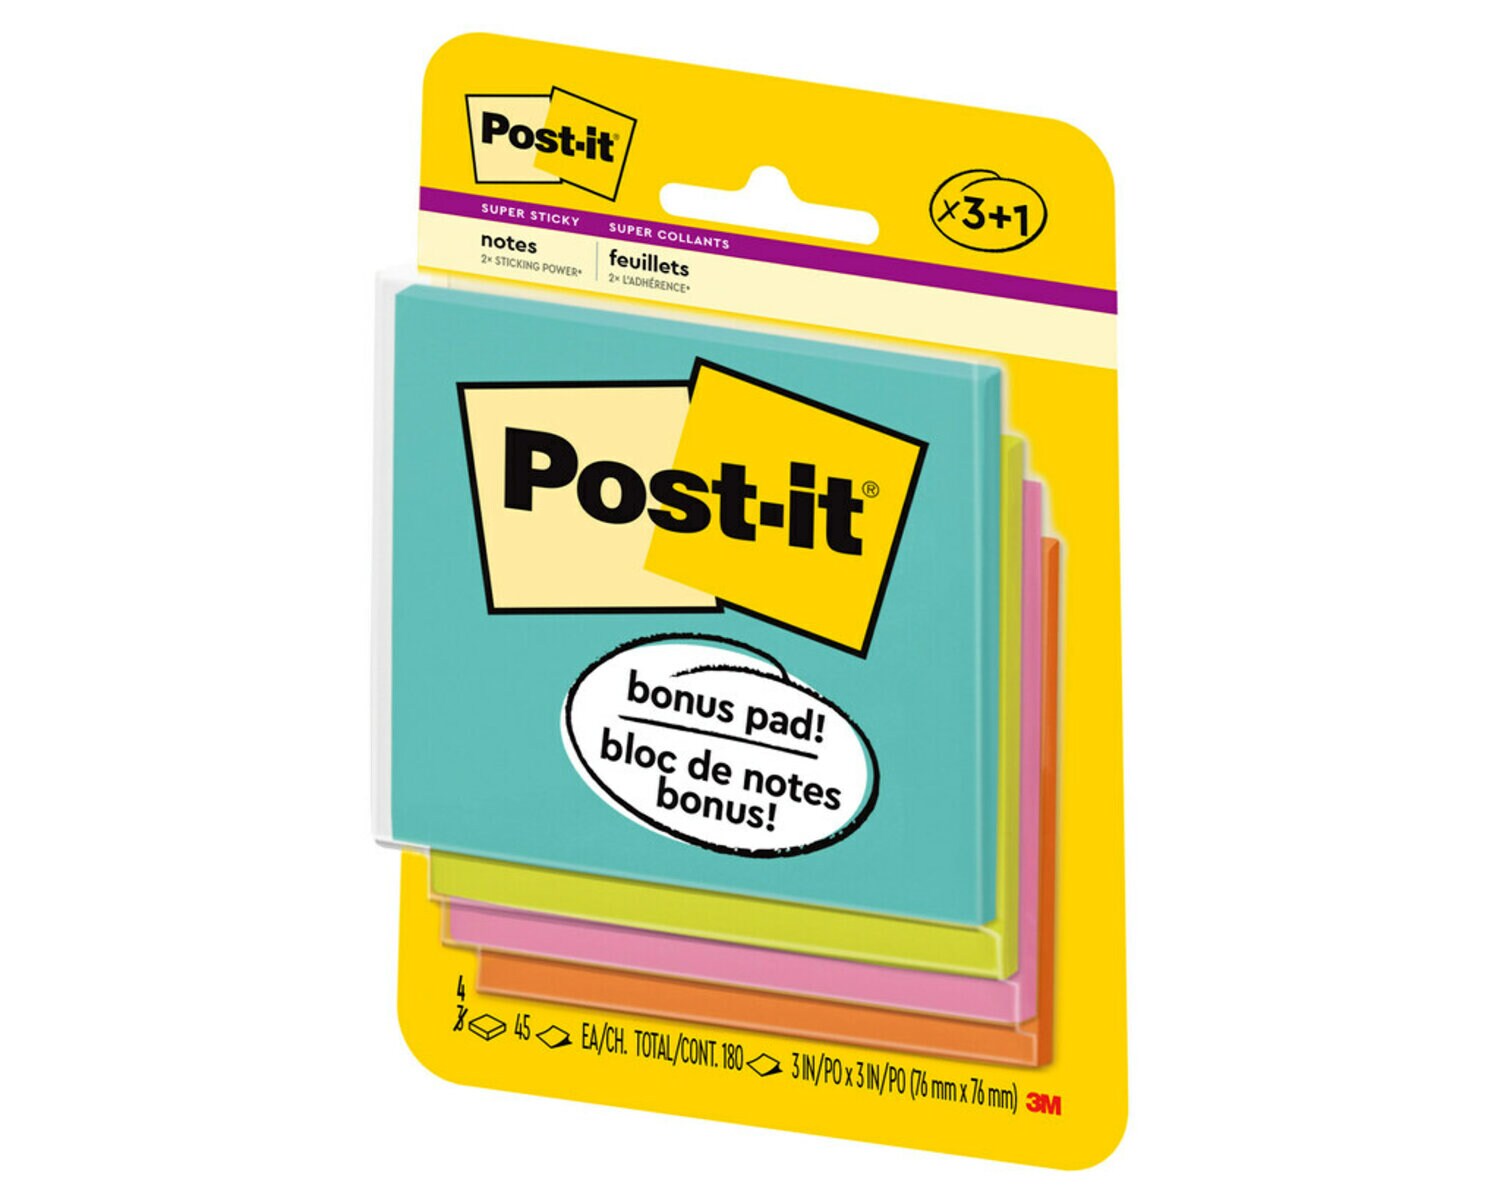 7100089127 - Post-it Super Sticky Notes 3321-SSMIA-B, 3 in x 3 in (76 mm x 76 mm), Supernova Neons Collection, 4 Pads/Pack, 45 Sheets/Pad